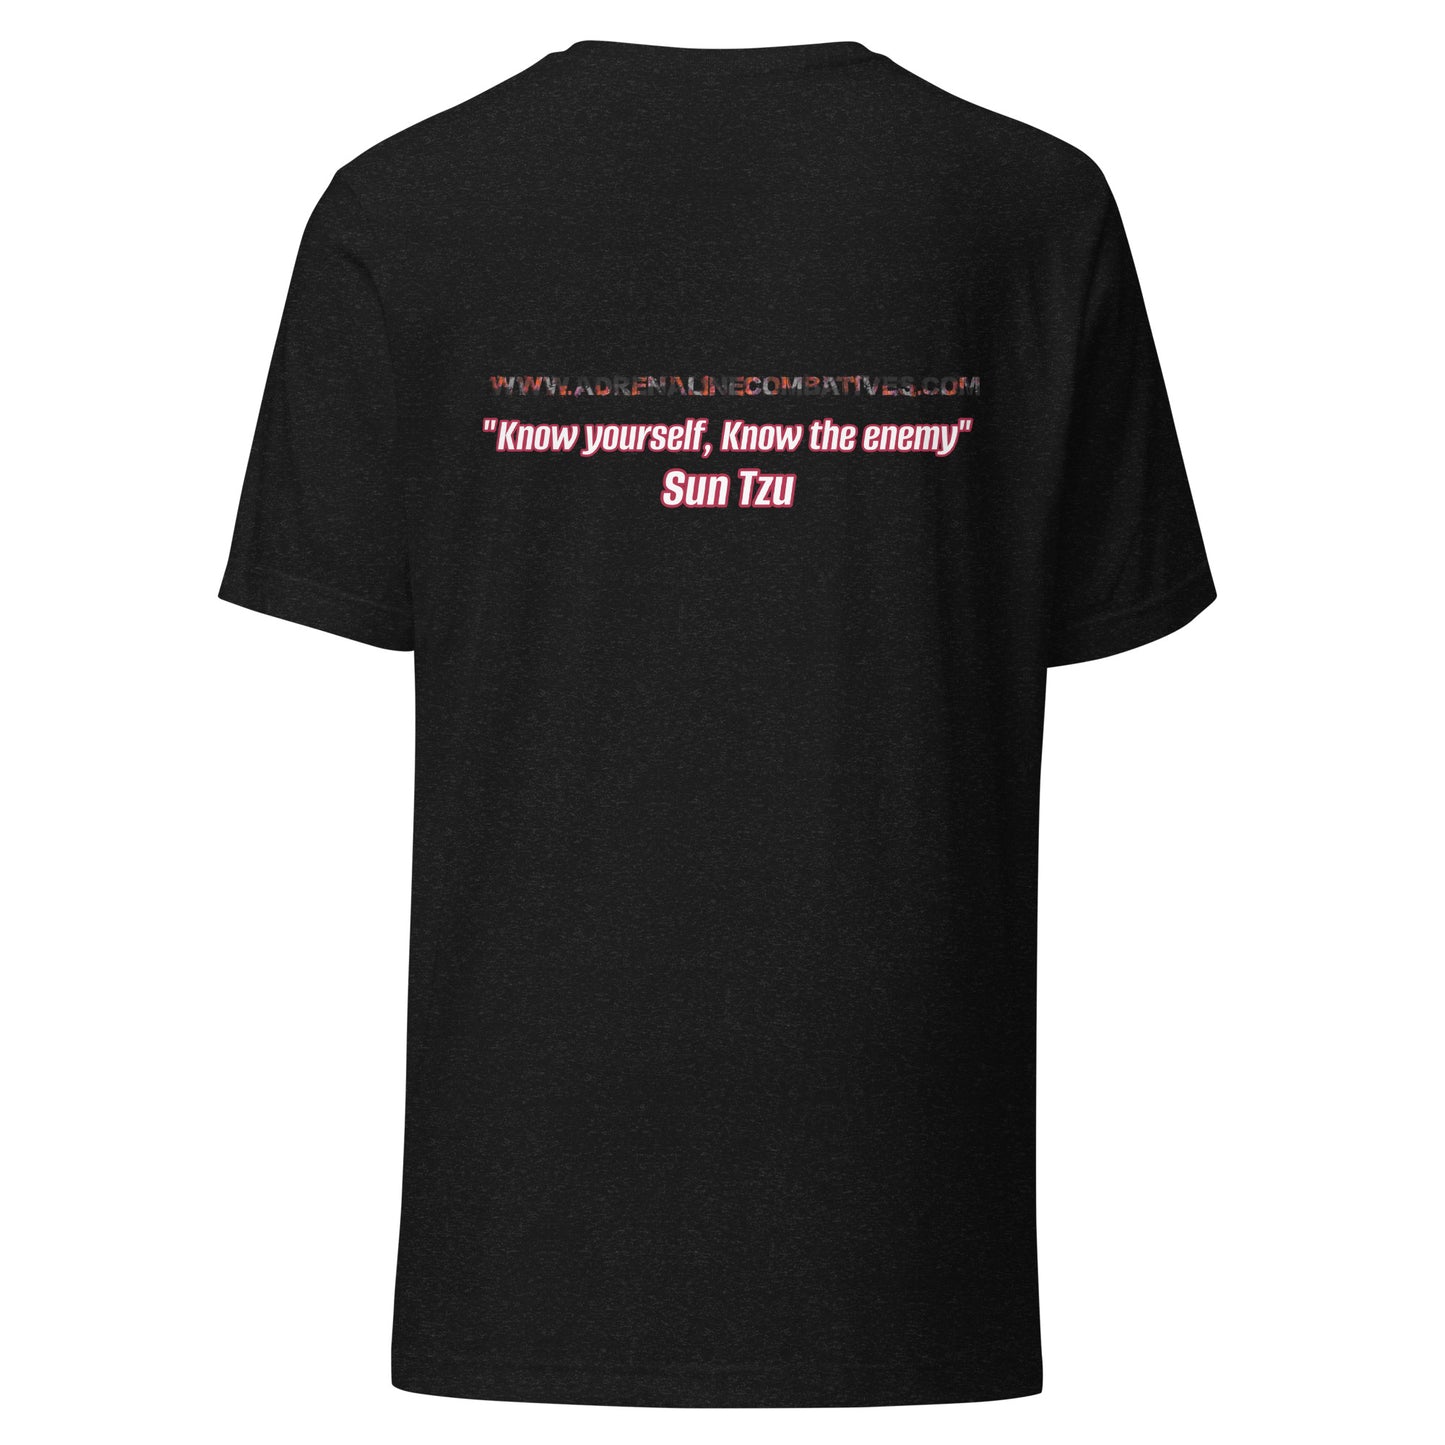 Unisex t-shirt - Adrenaline Combatives - Sun Tzu Quote: “Know yourself, know the enemy”